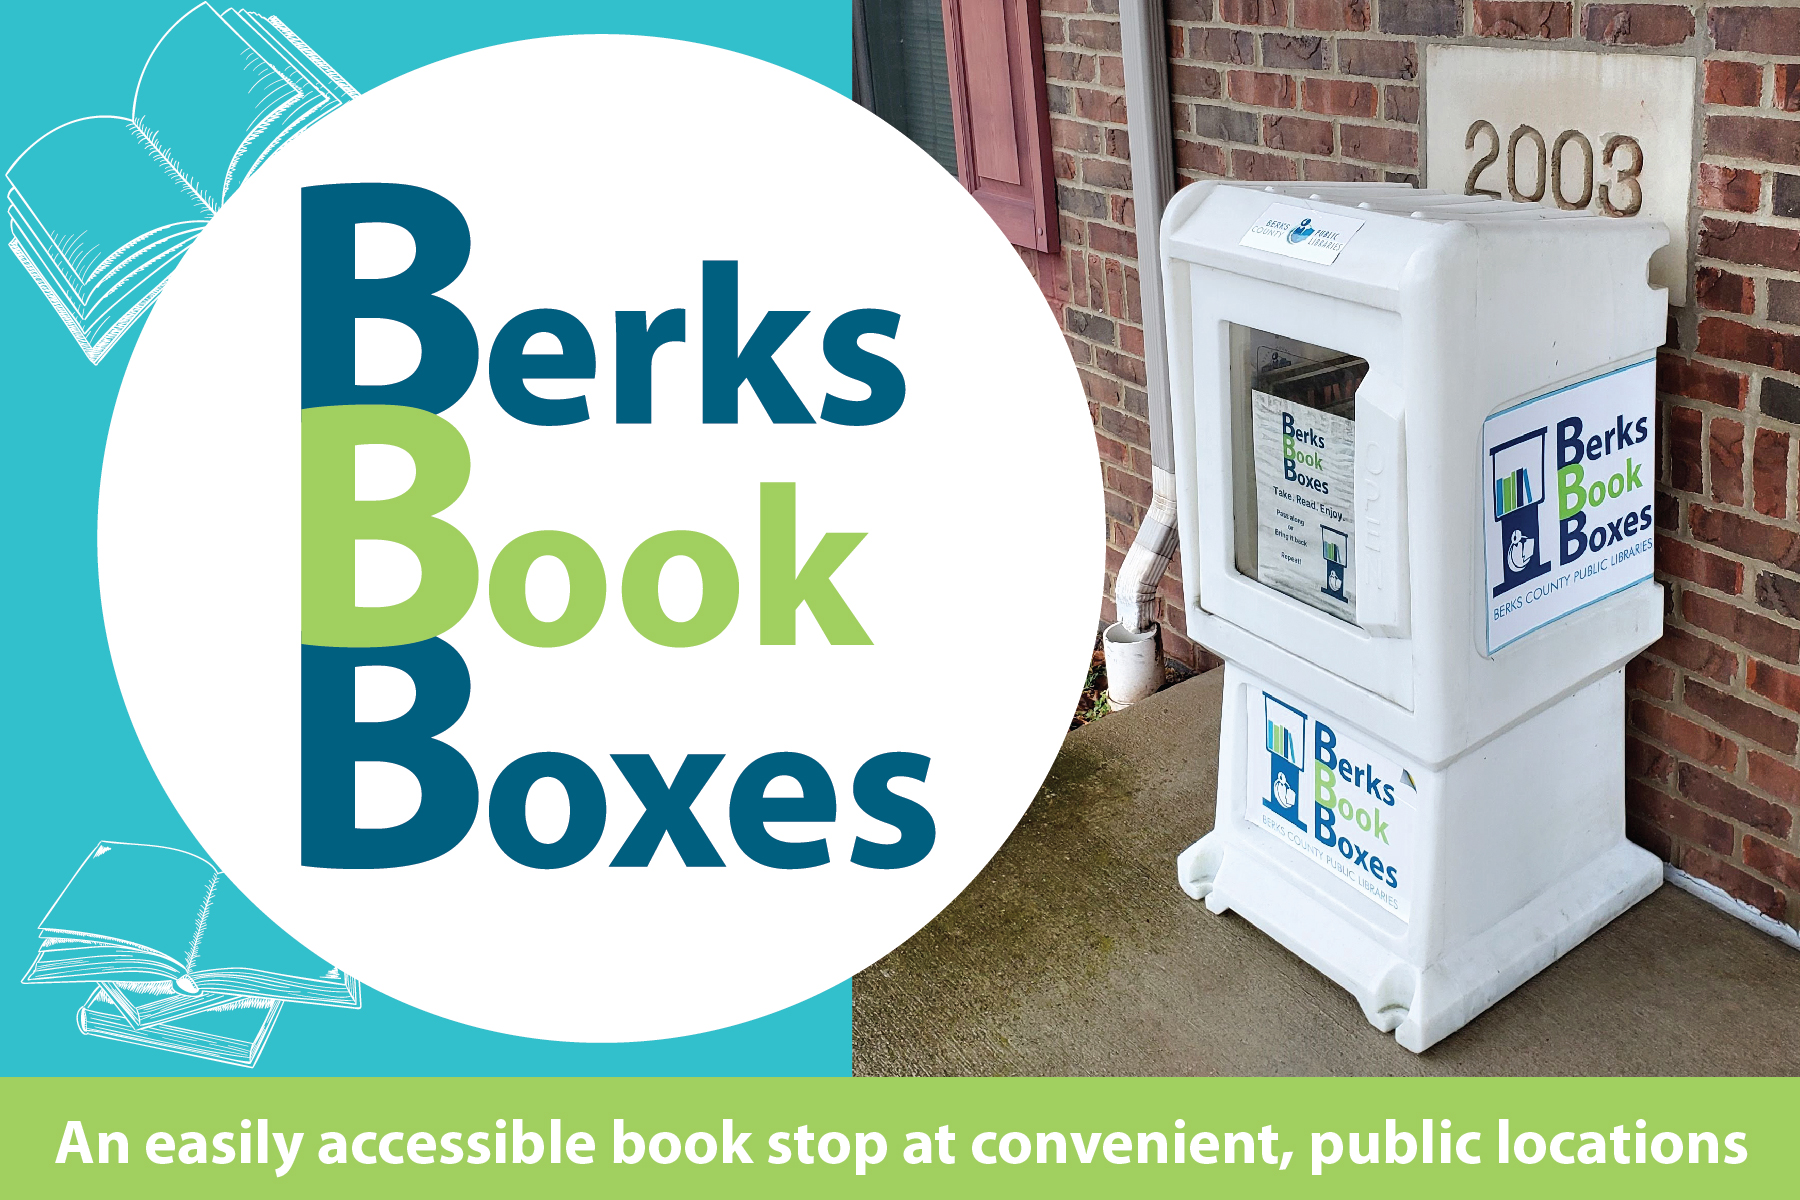 white newspaper box with books inside and Berks Book Box logo on side